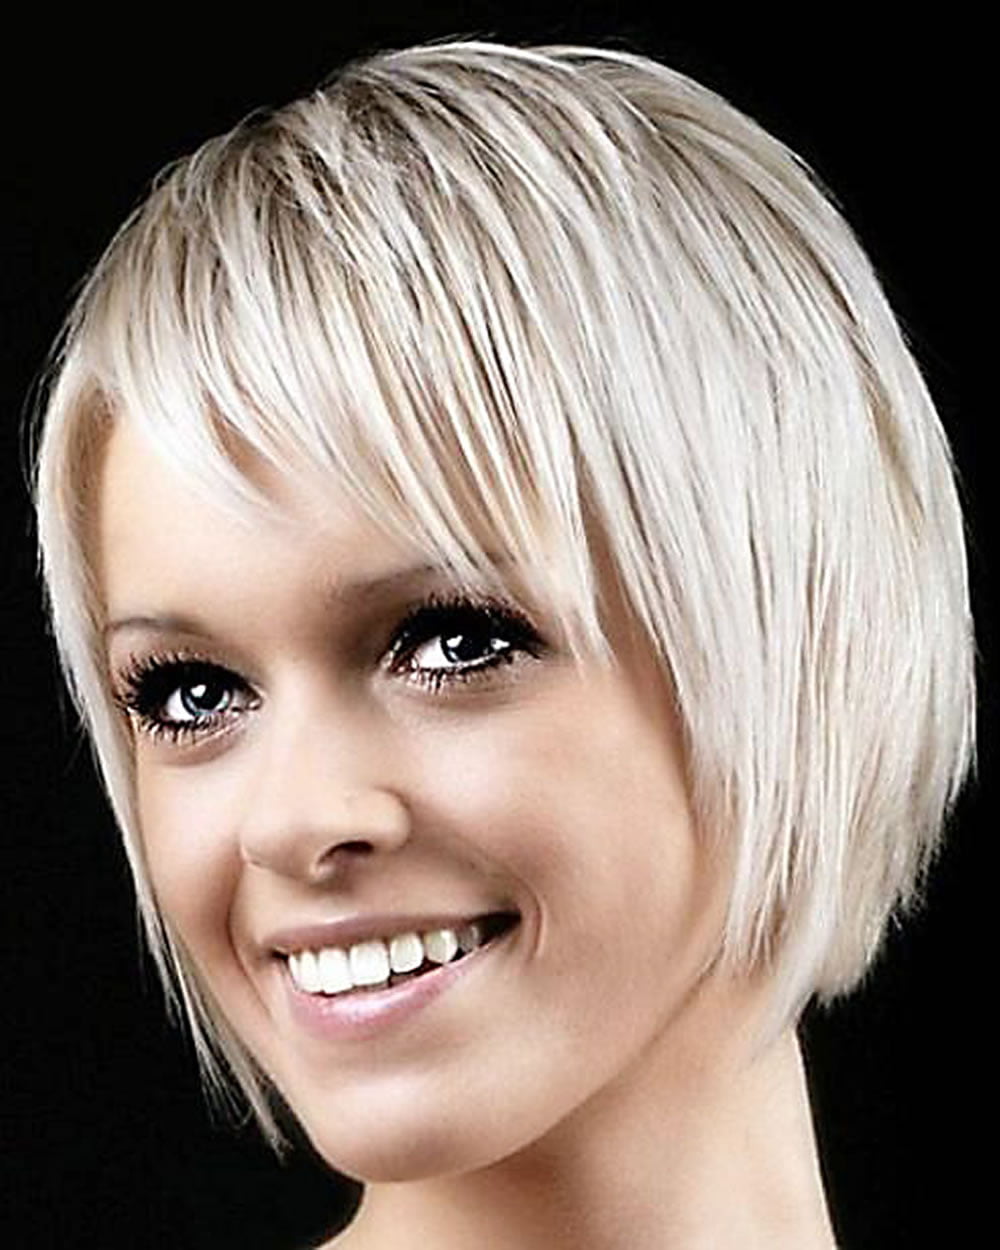 Cool #HairStylesForShortHairAndCurly That Will Make You Stand Out!